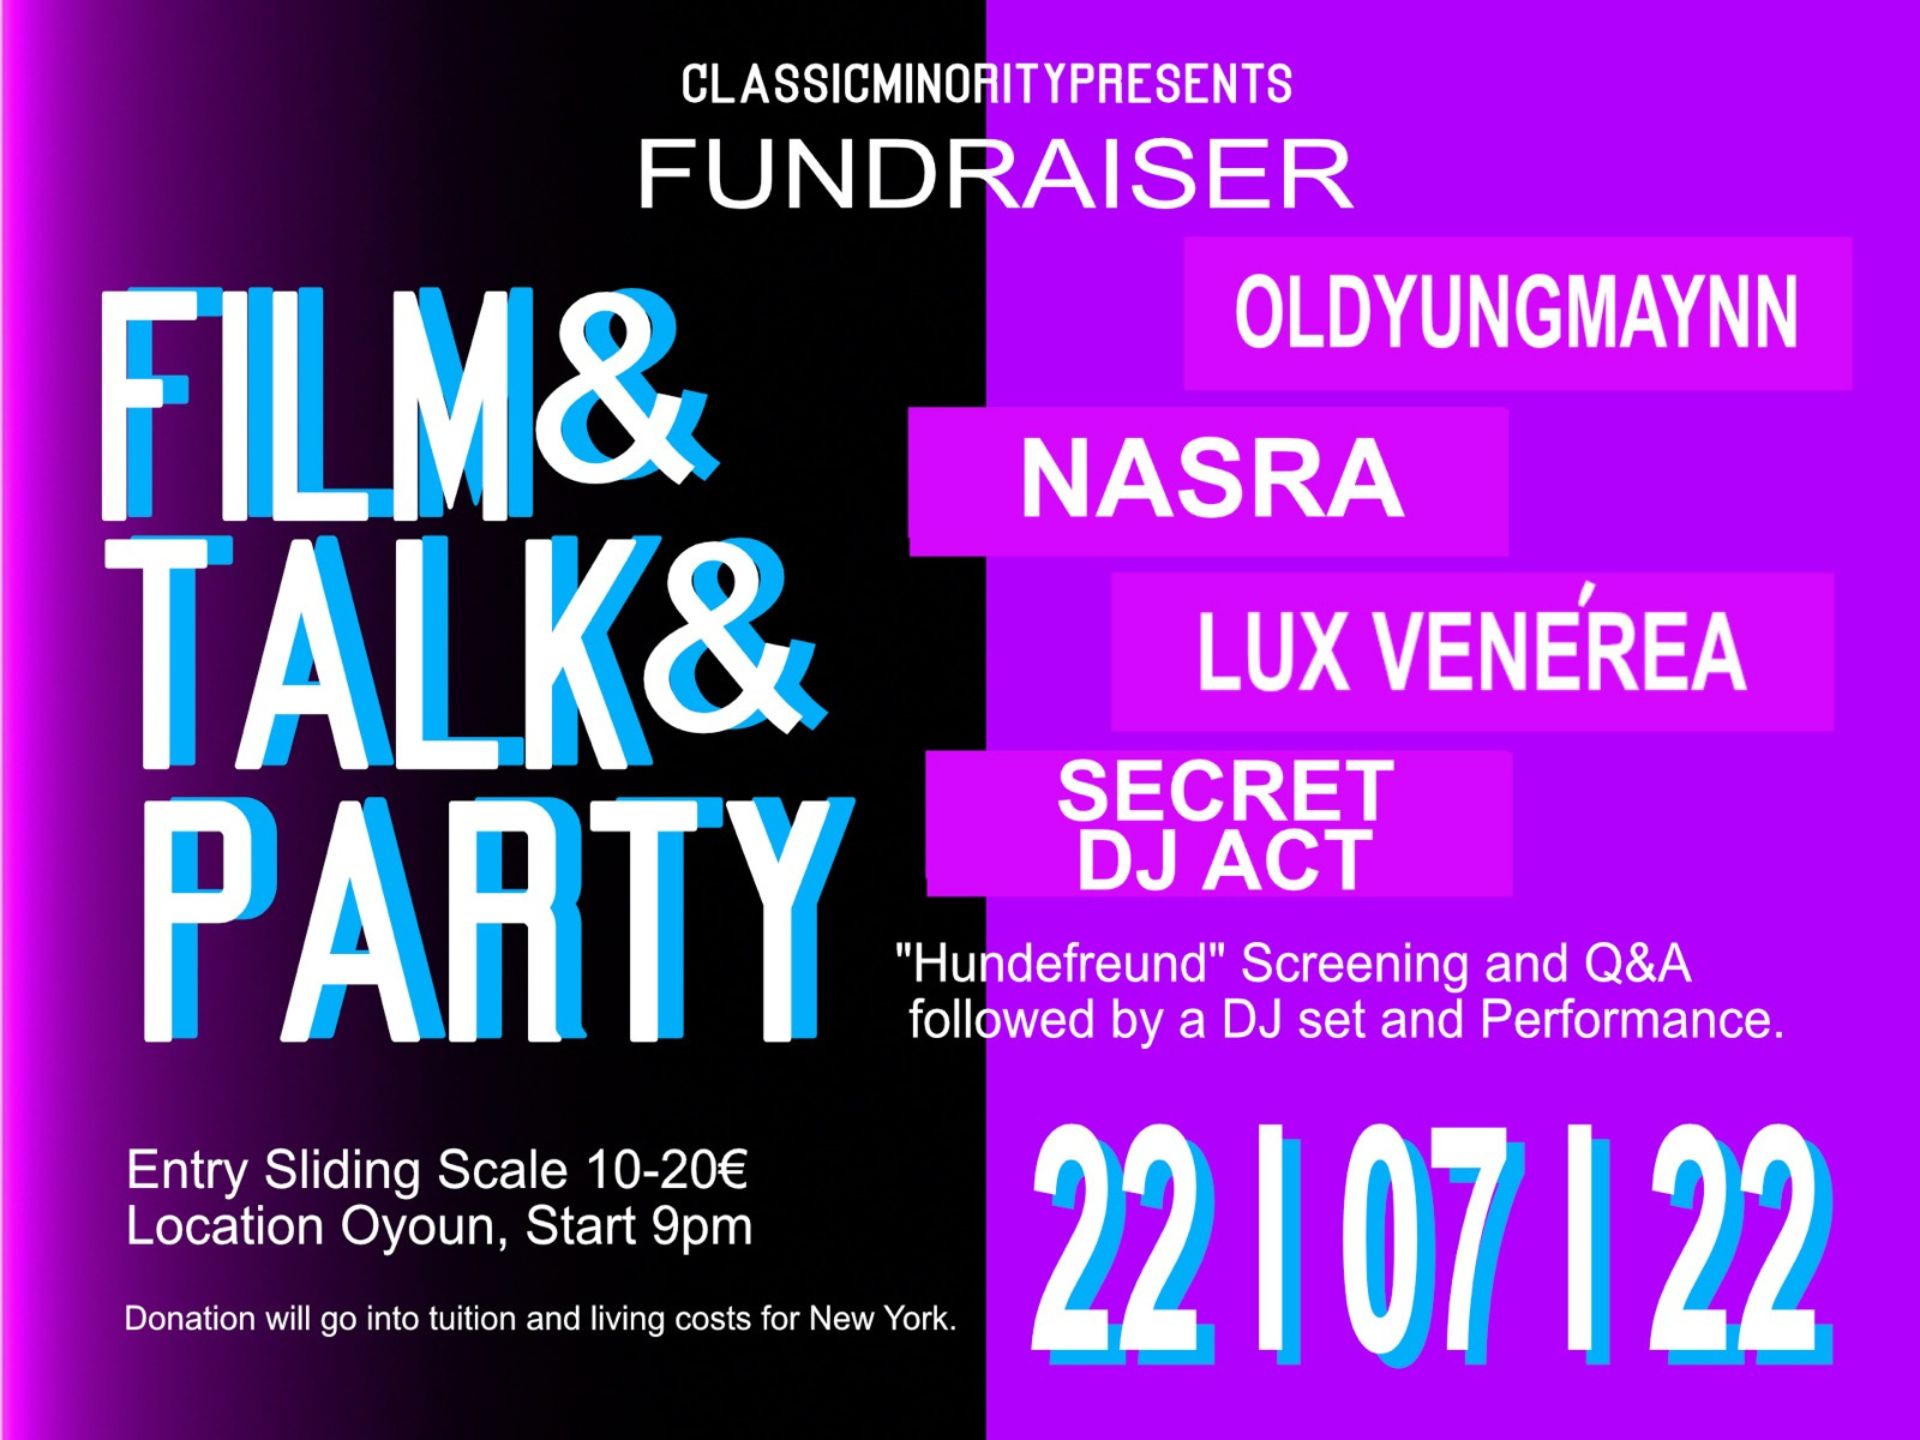 Classic Minority Presents: Fundraiser for NYU Tisch (Filmscreening, Diskussion & Party)